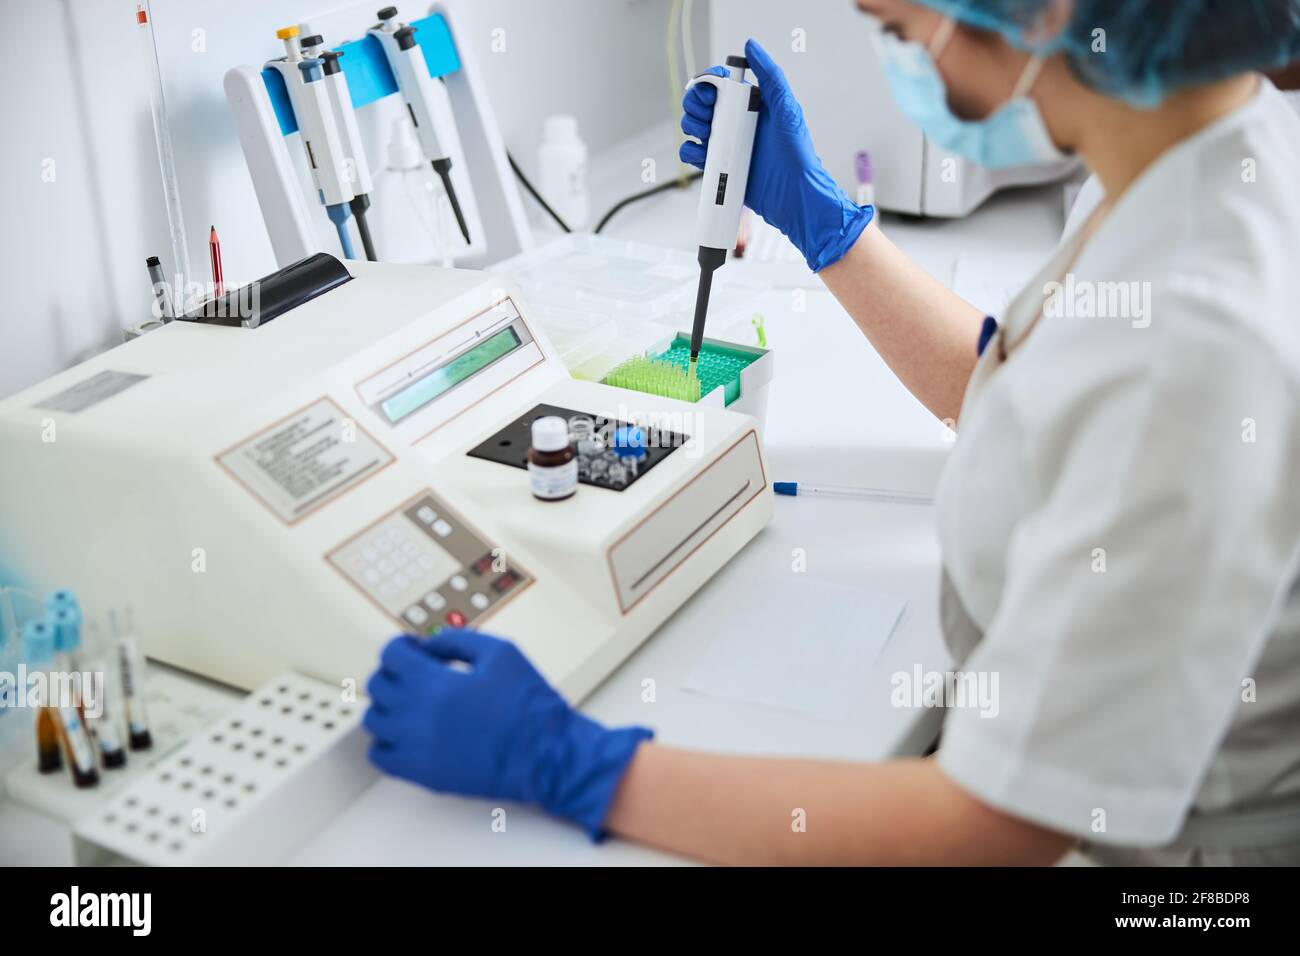 Scientist in a mask preparing a laboratory tool for pipetting Stock Photo